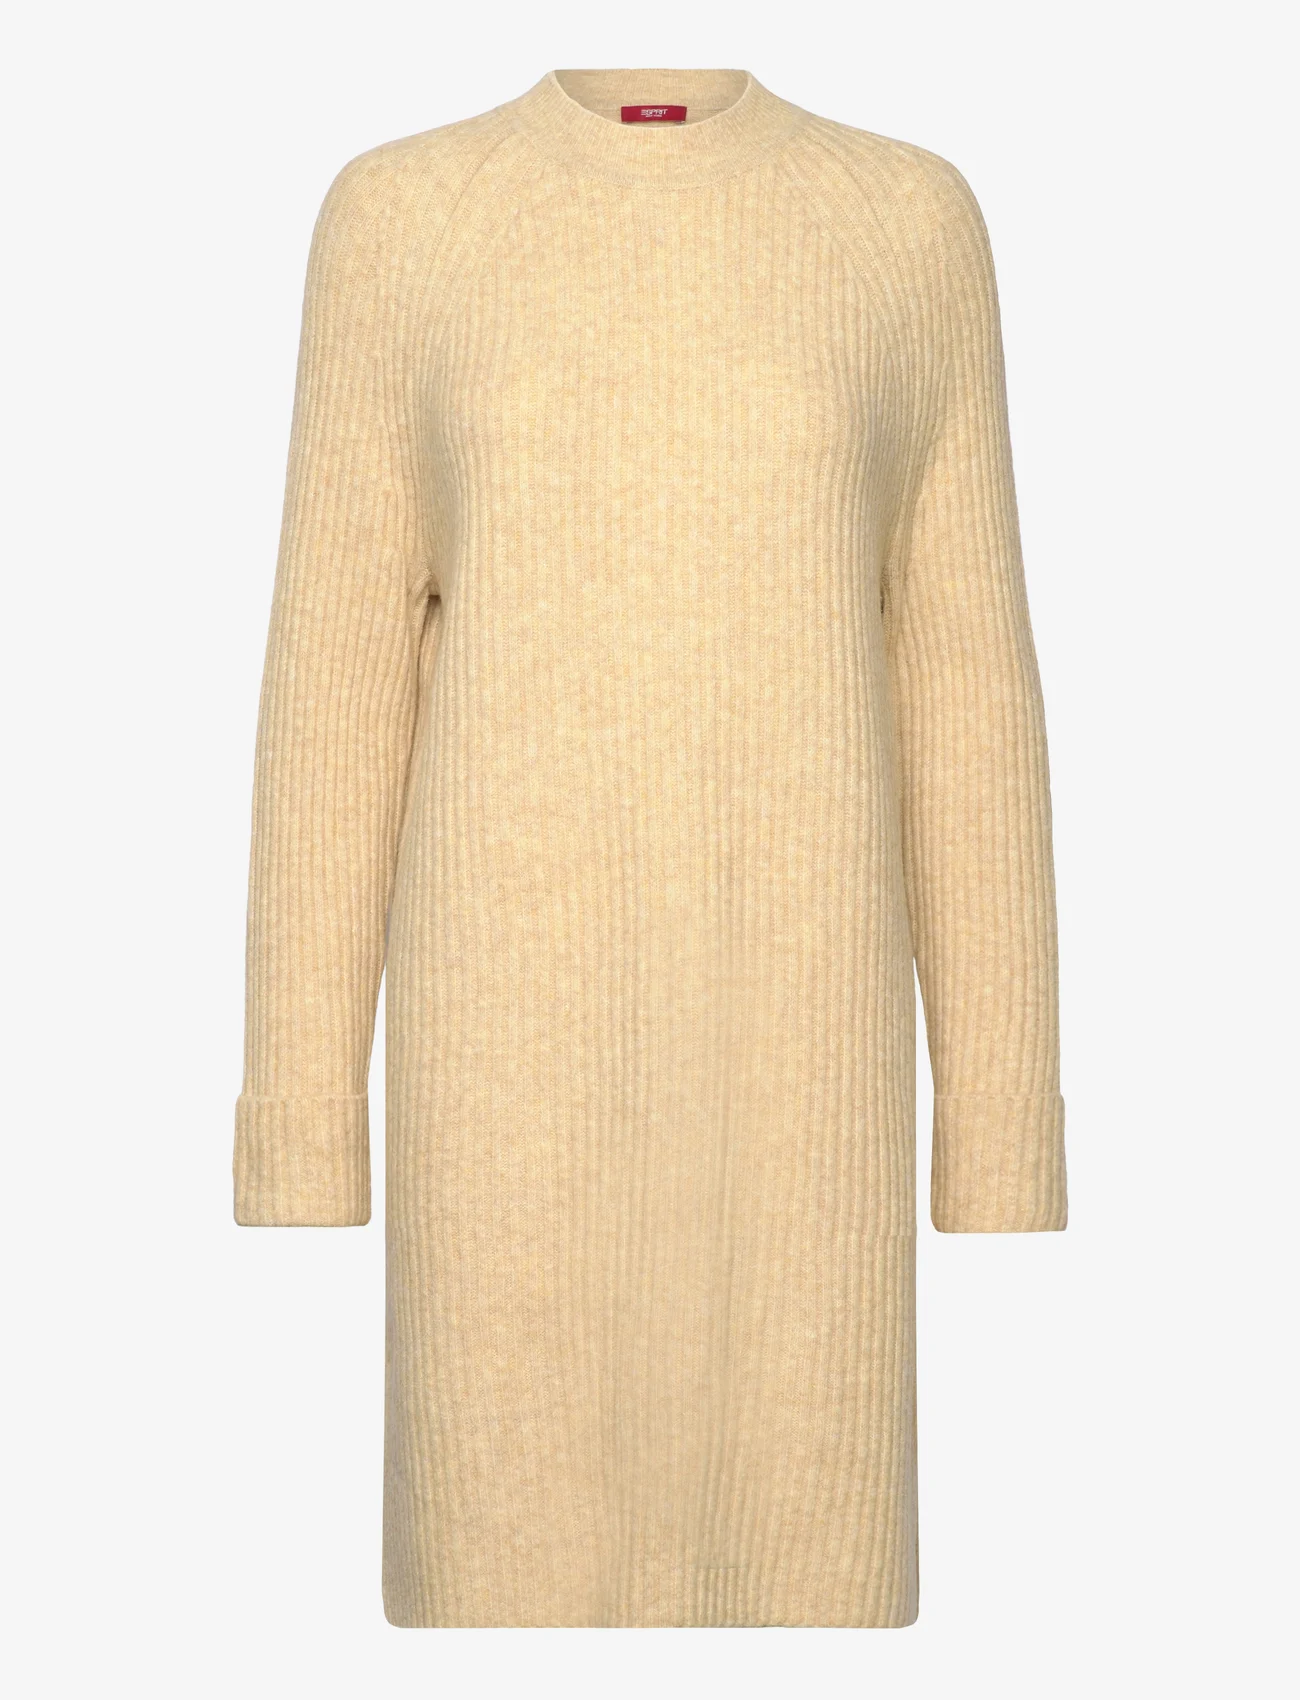 Esprit Casual - Dresses flat knitted - knitted dresses - light beige 2 - 0